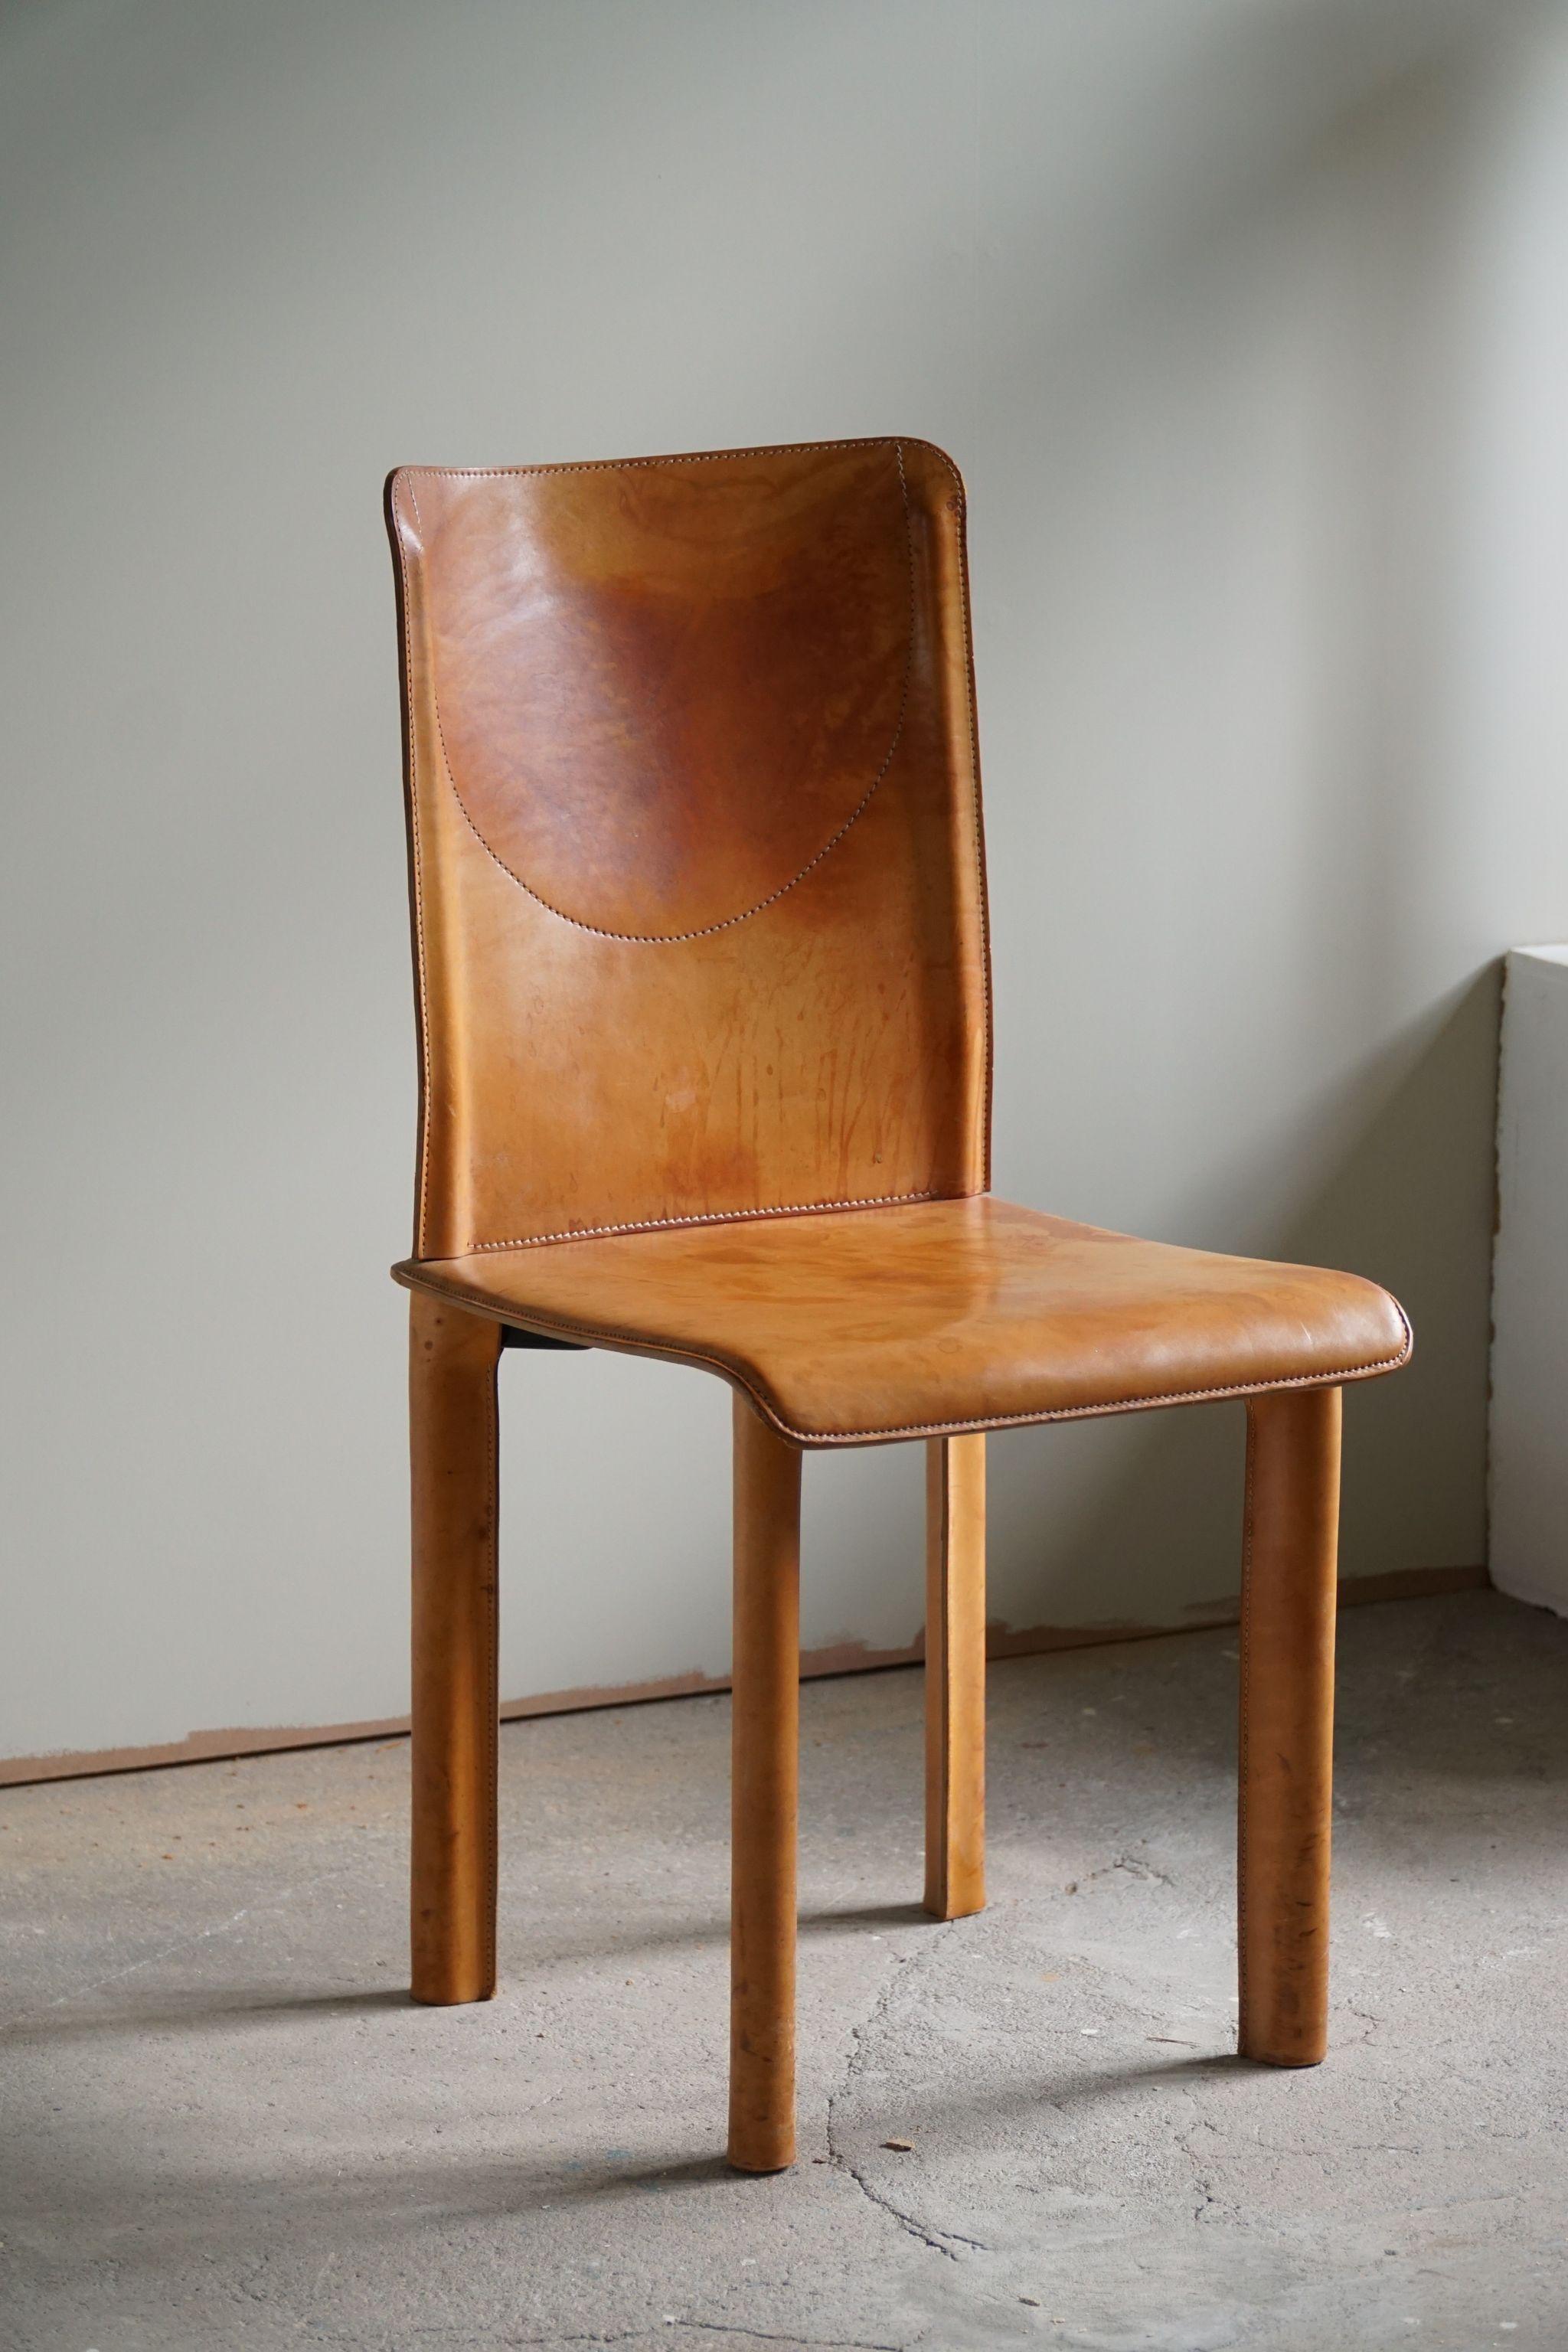 Art Deco Italian Modern, Dining Chair in Patinated Cognac Leather, Mario Bellini, 1970s